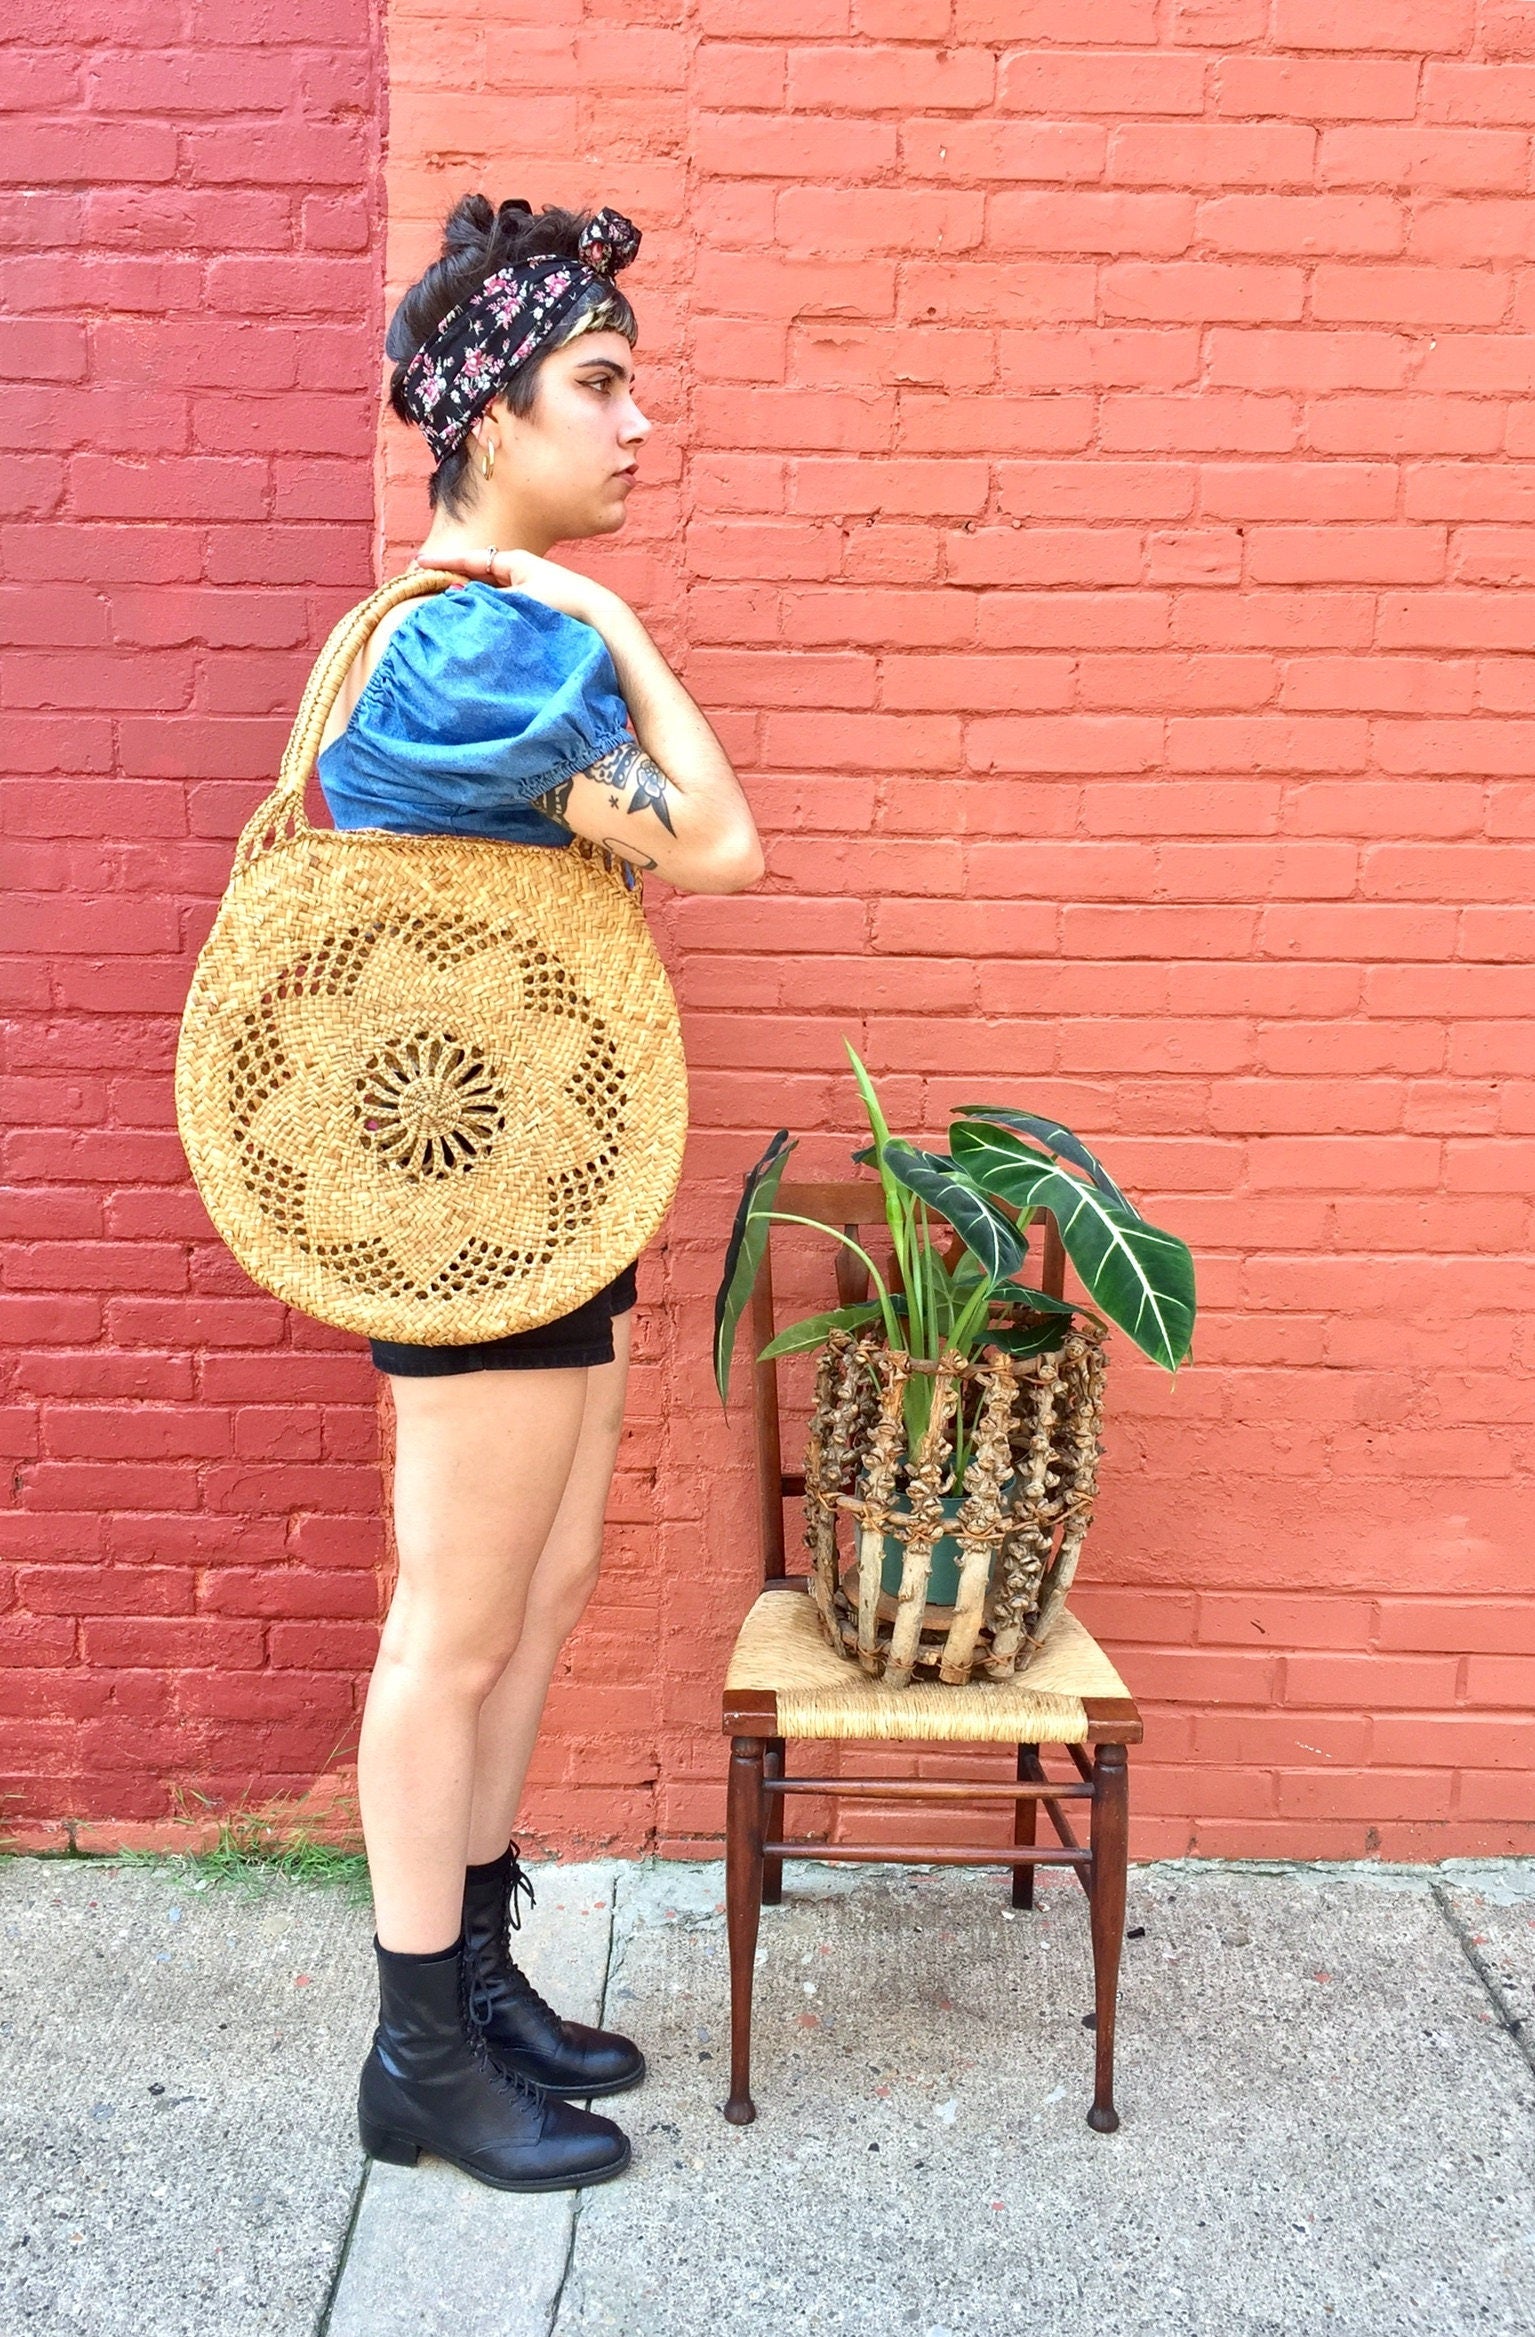 Stylish woman wearing a blue top, patterned yellow tote bag, and black boots standing next to a potted plant in front of a brick wall.